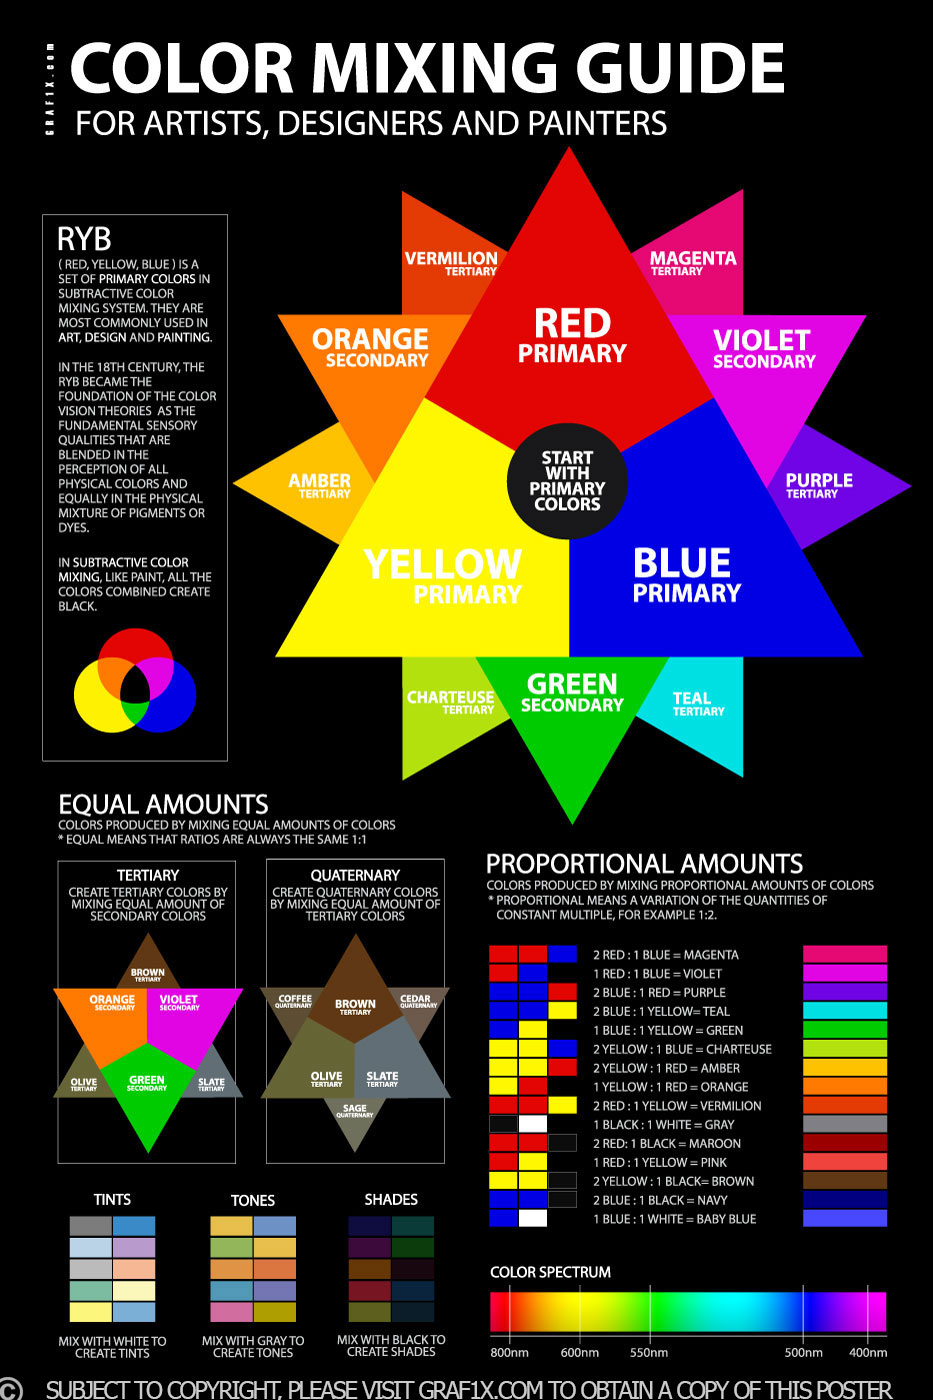 ryb color mixing chart guide poster tool formula pdf